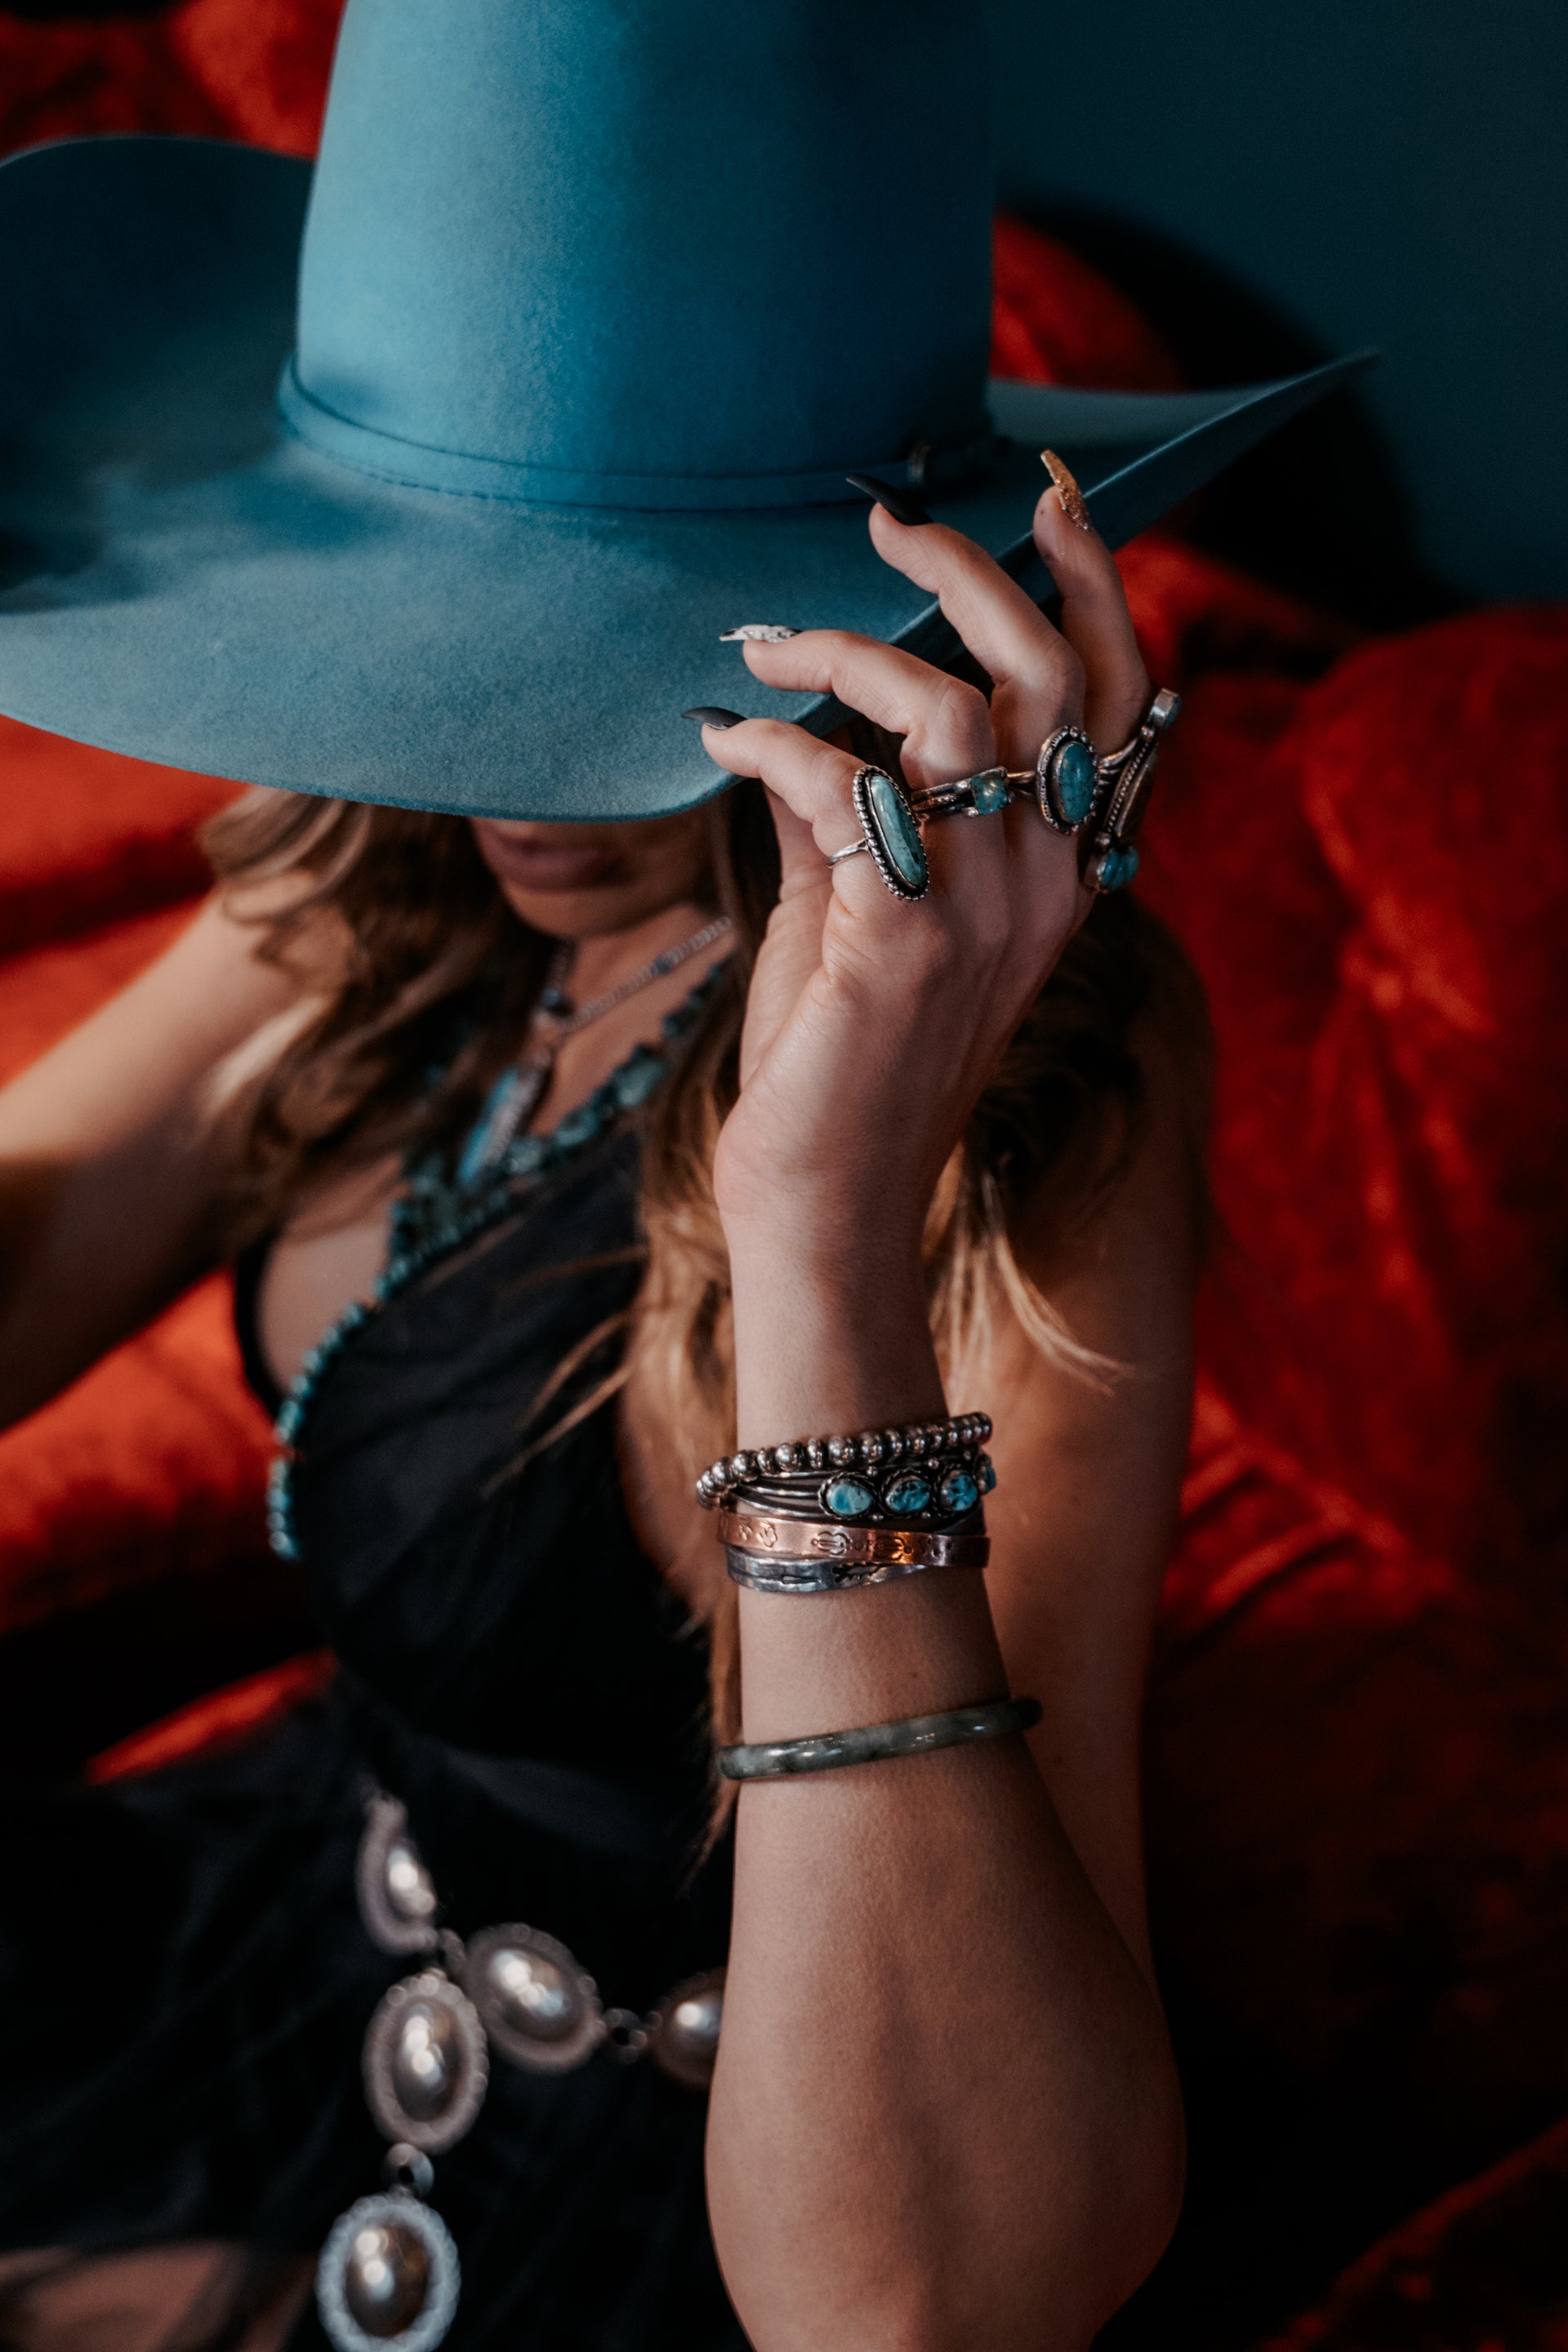 Load video: Video showcasing turquoise worn by models dressed in modern western fashion clothing